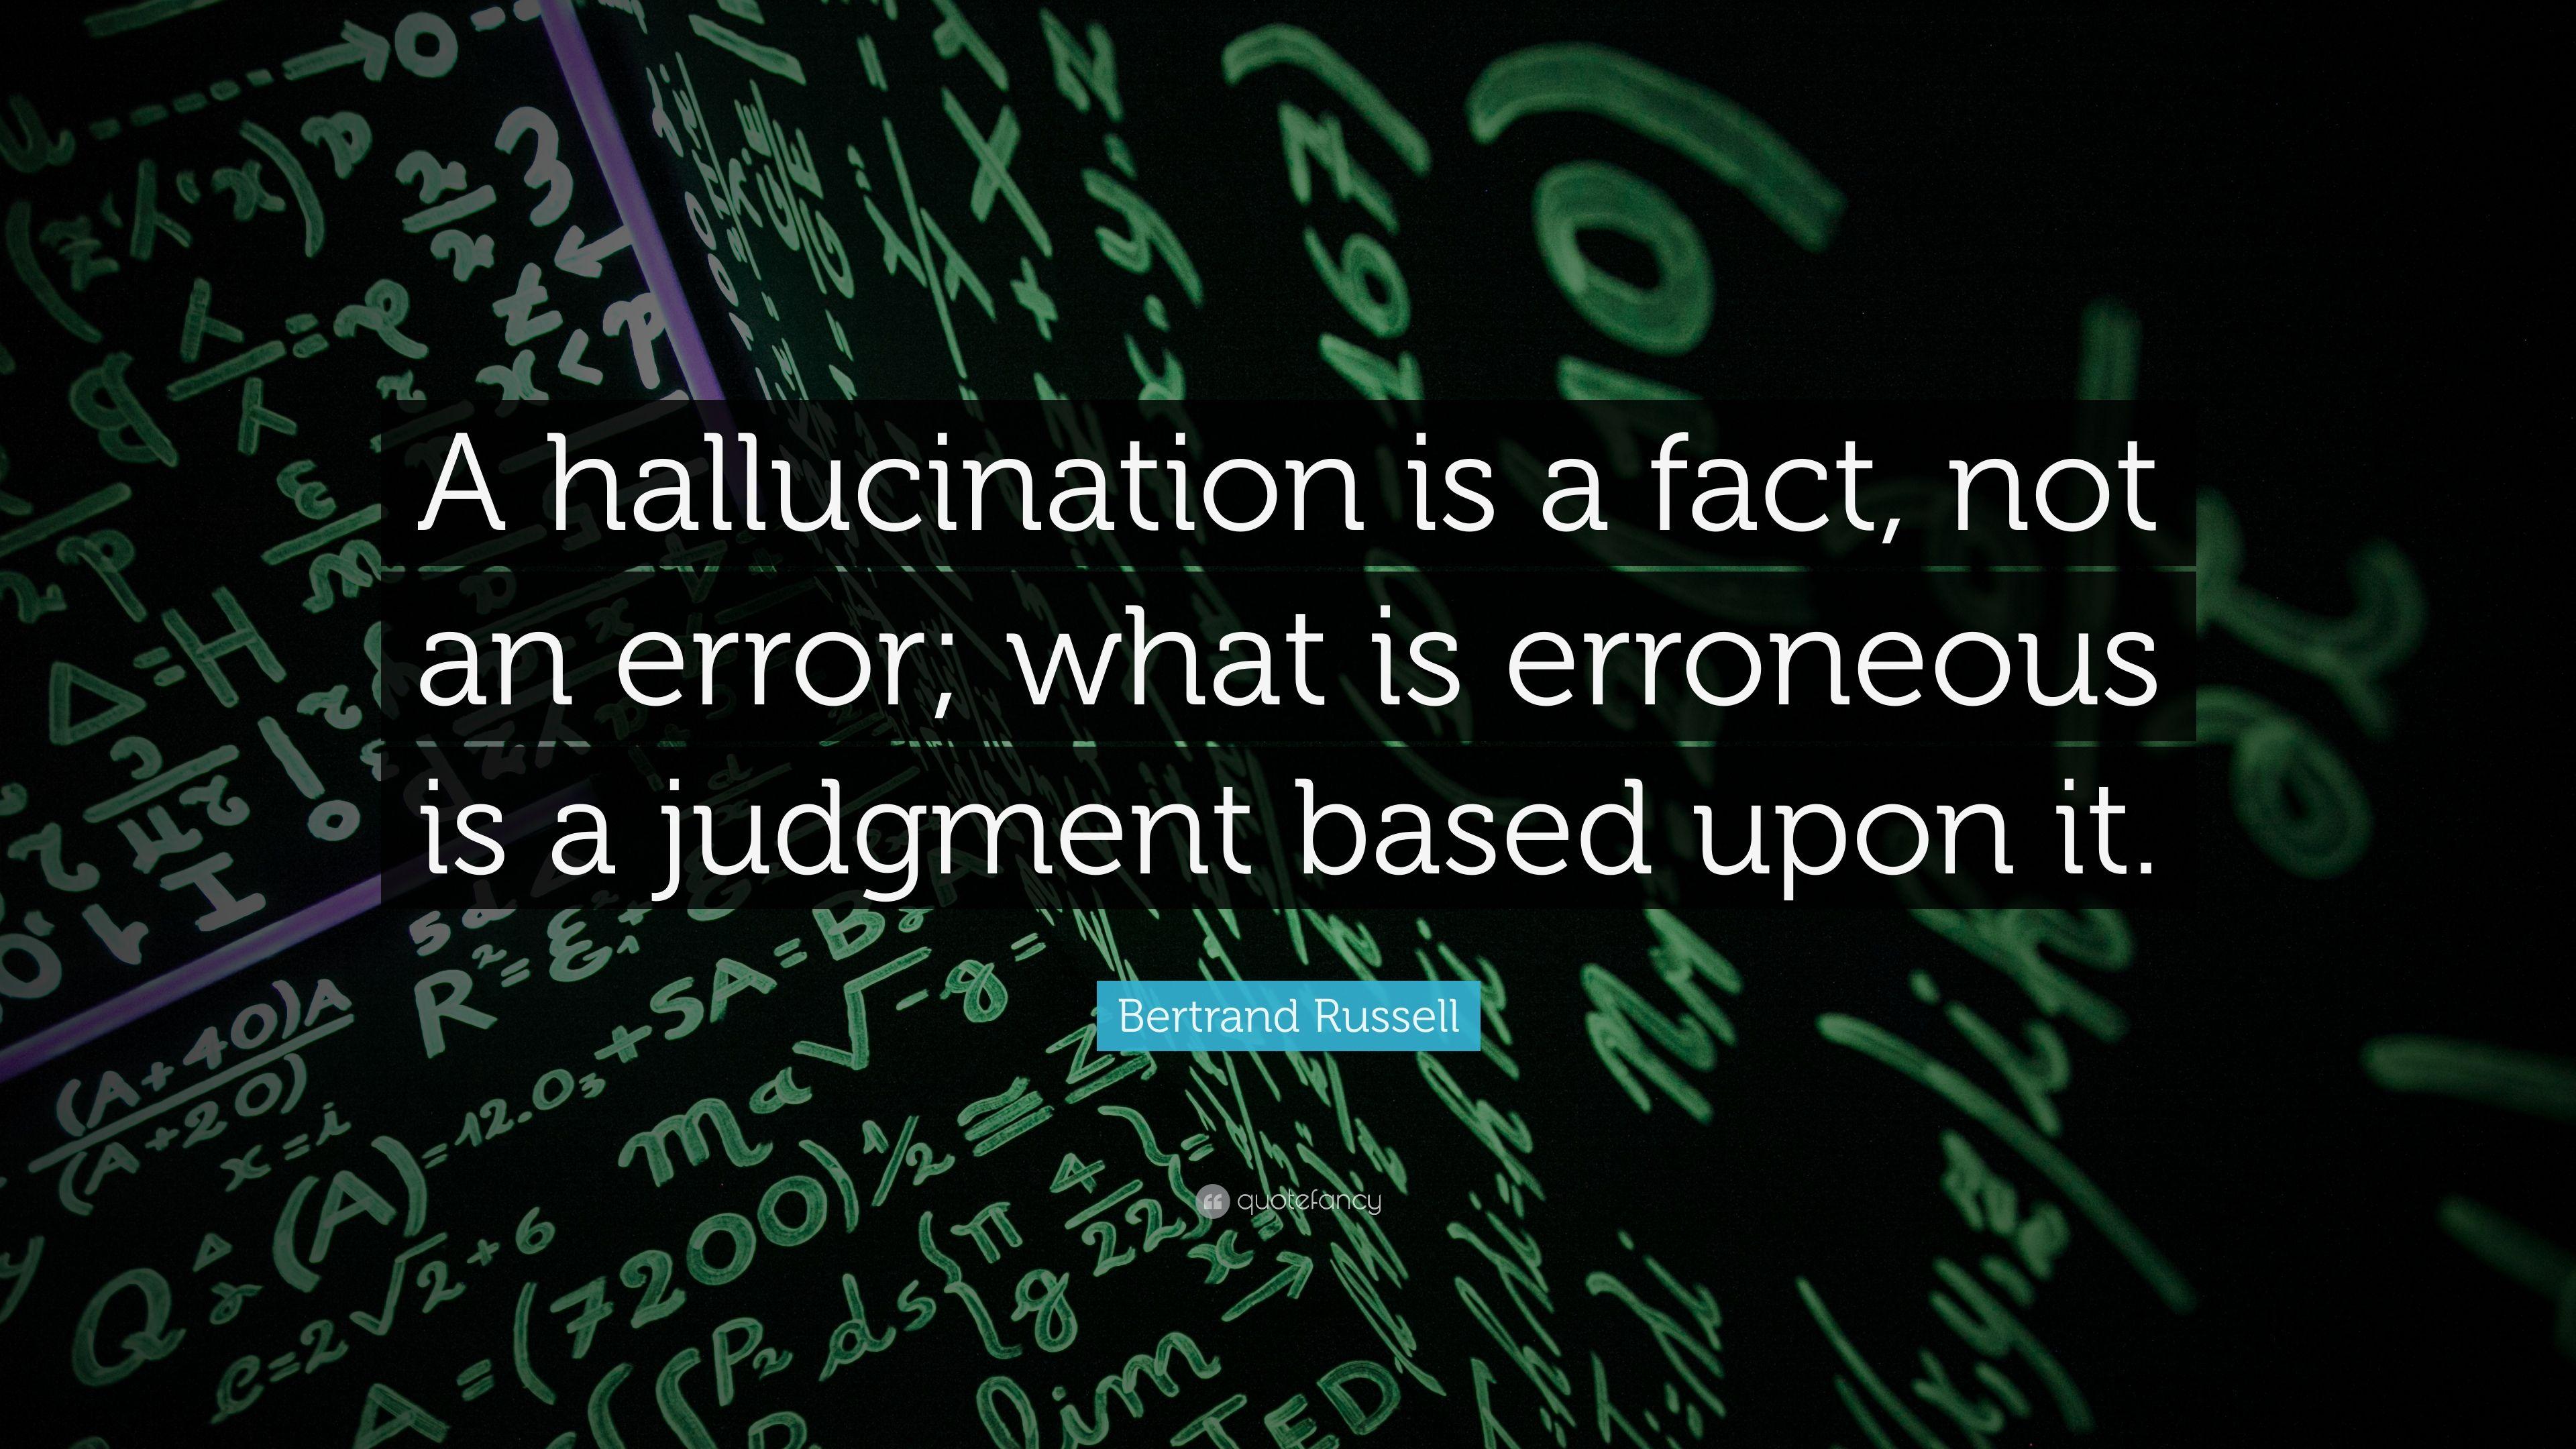 Bertrand Russell Quote: “A hallucination is a fact, not an error